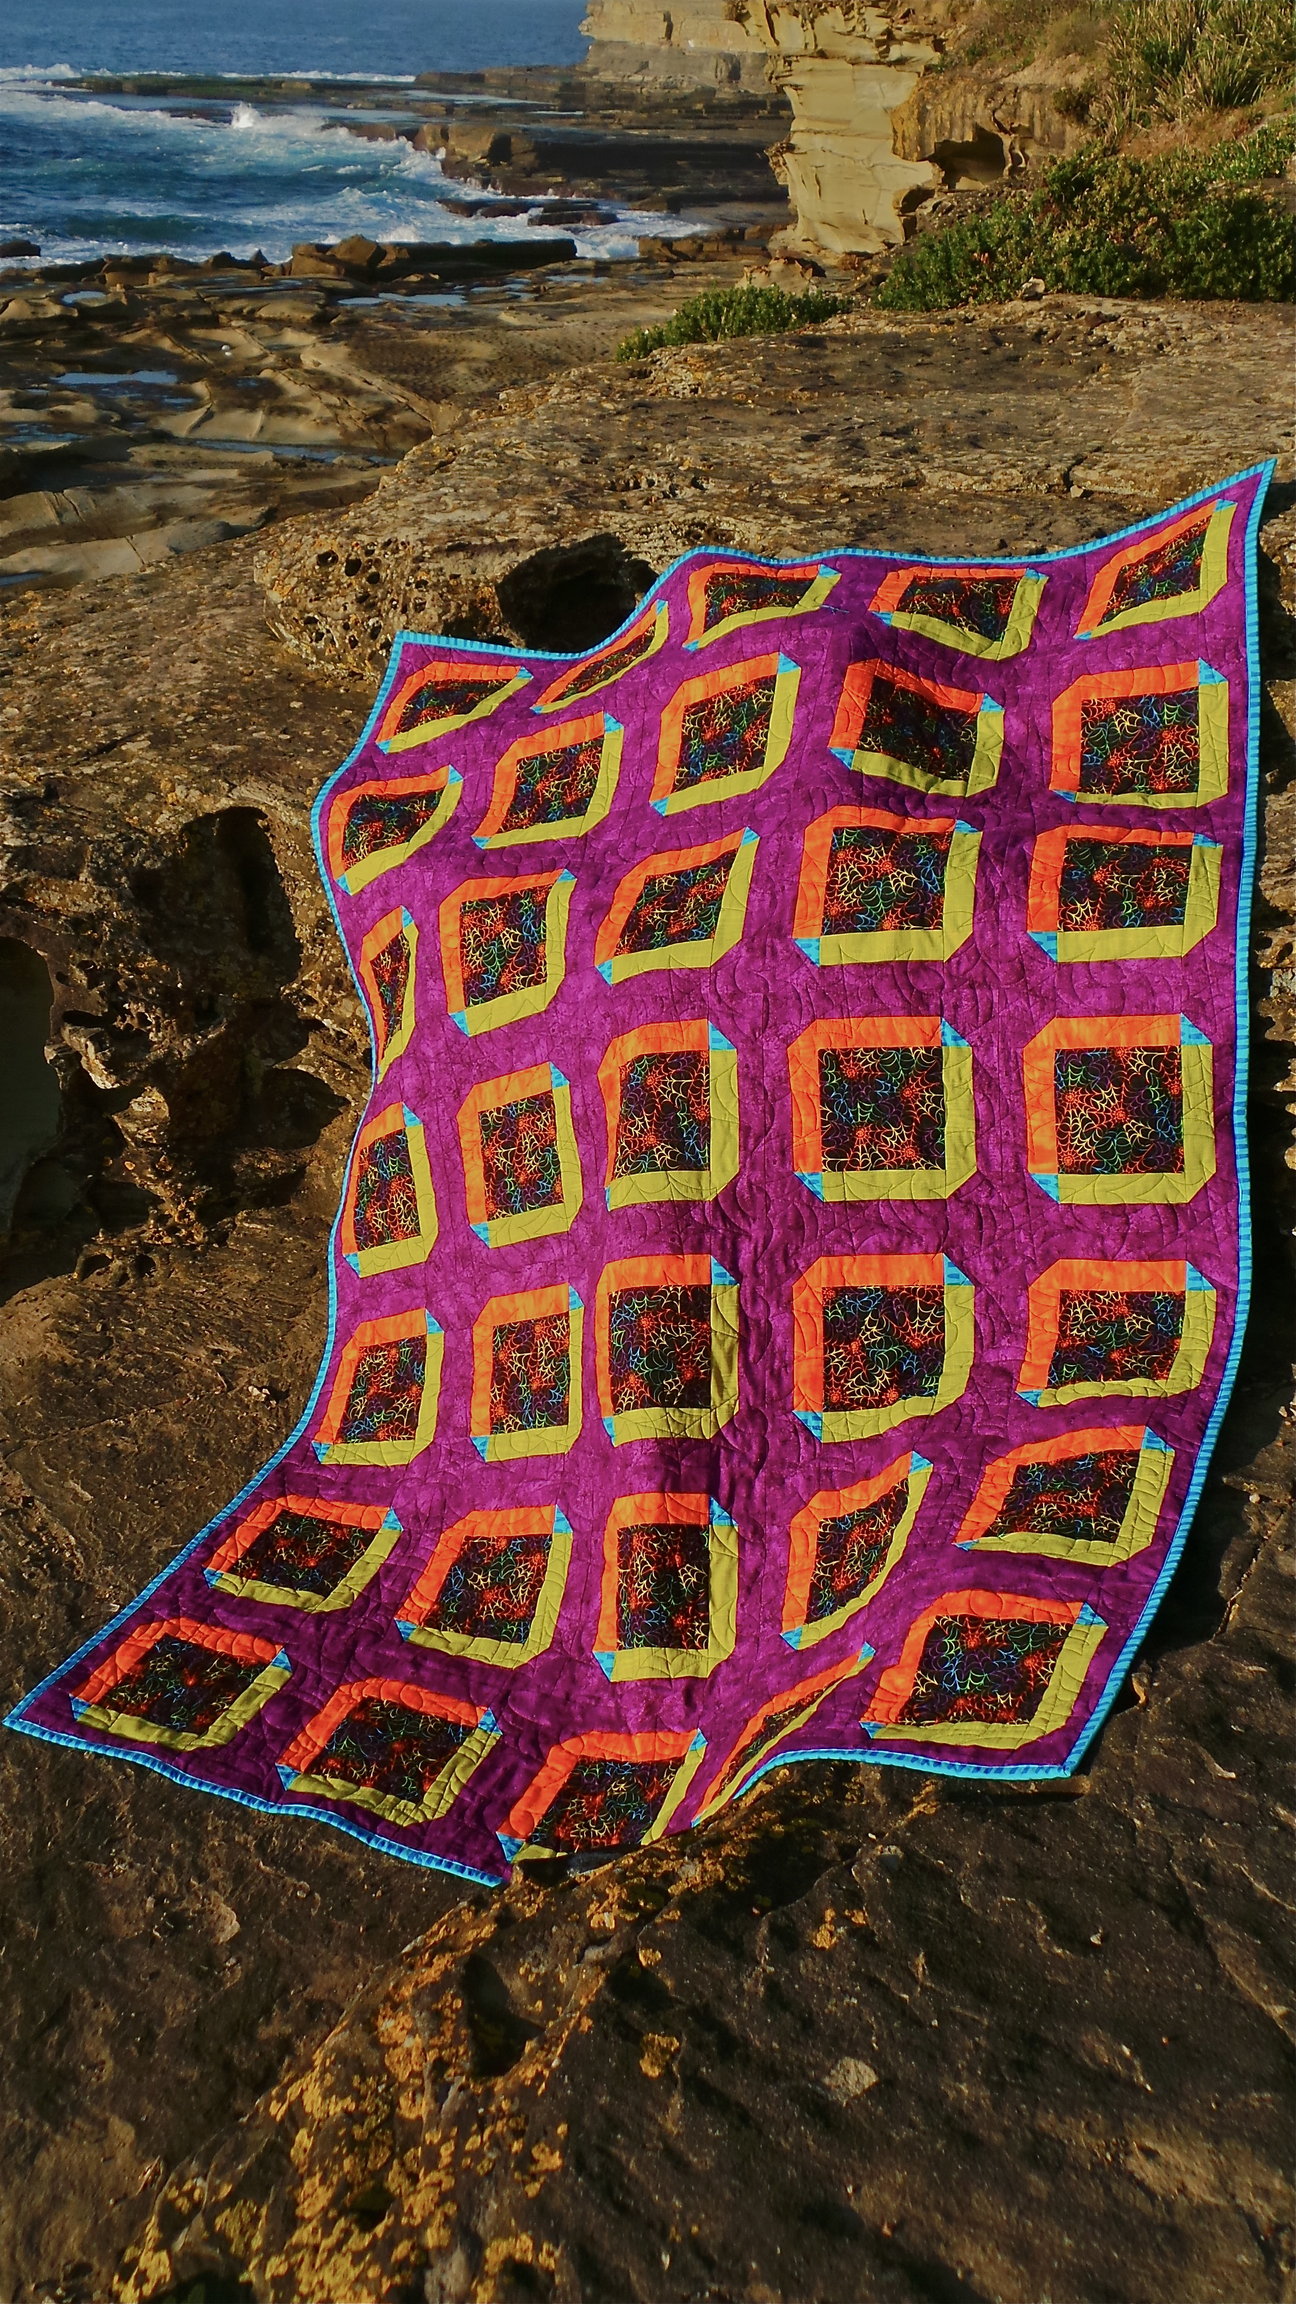 My finished Cushion Cut quilt, shot at the Haven at Terrigal, NSW